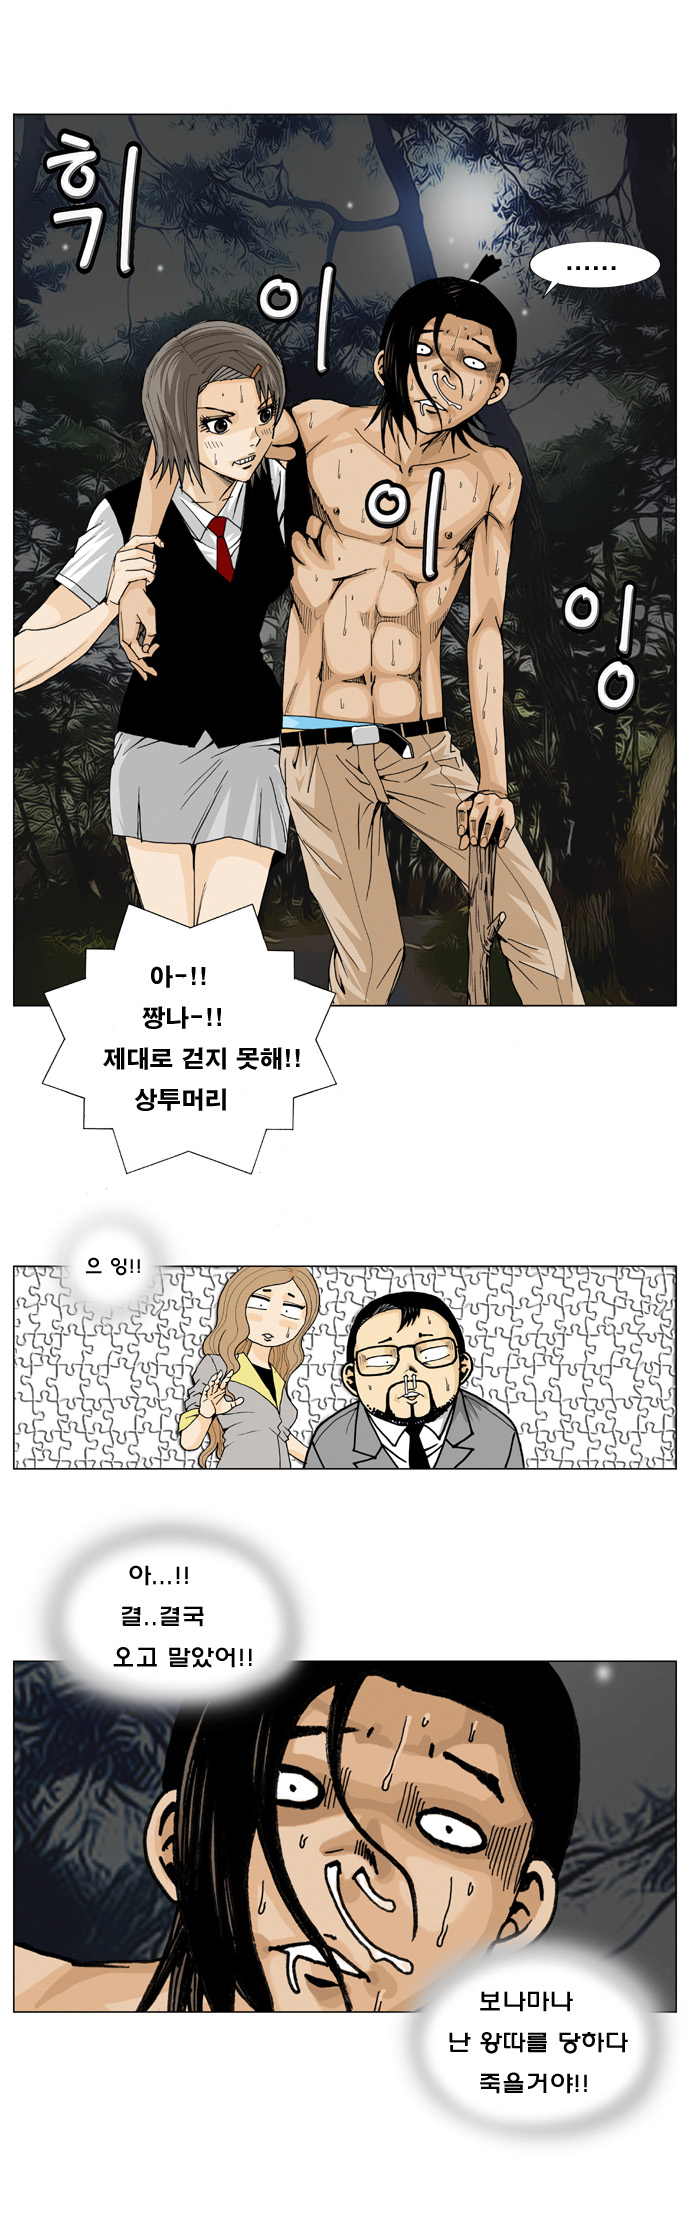 Ultimate Legend - Kang Hae Hyo - Chapter 3 - Page 19